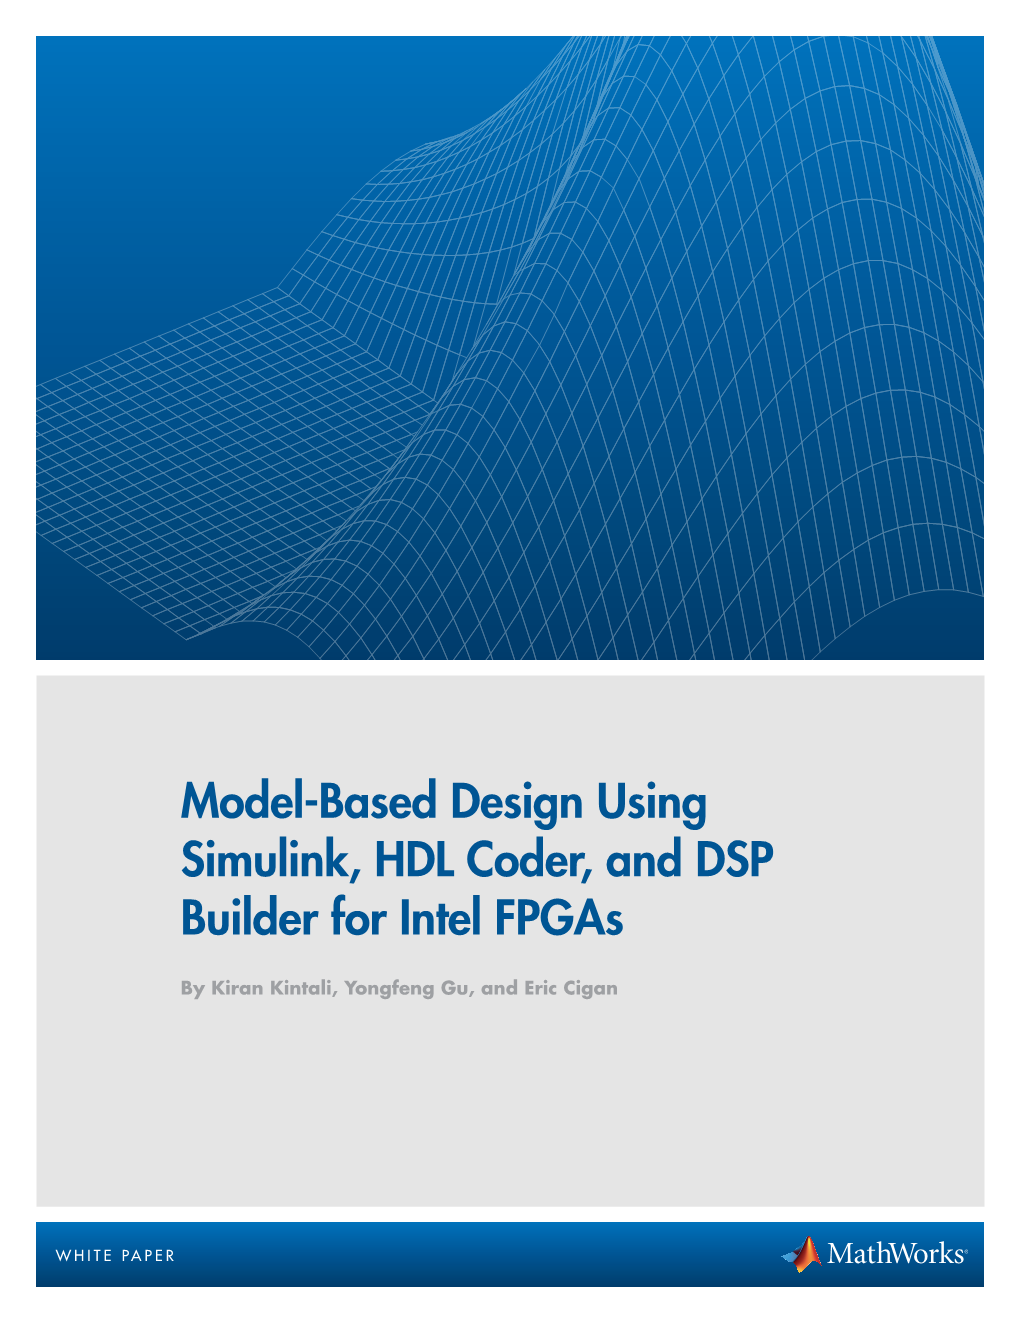 Model-Based Design for Altera Fpgas Using Simulink, HDL Coder, And